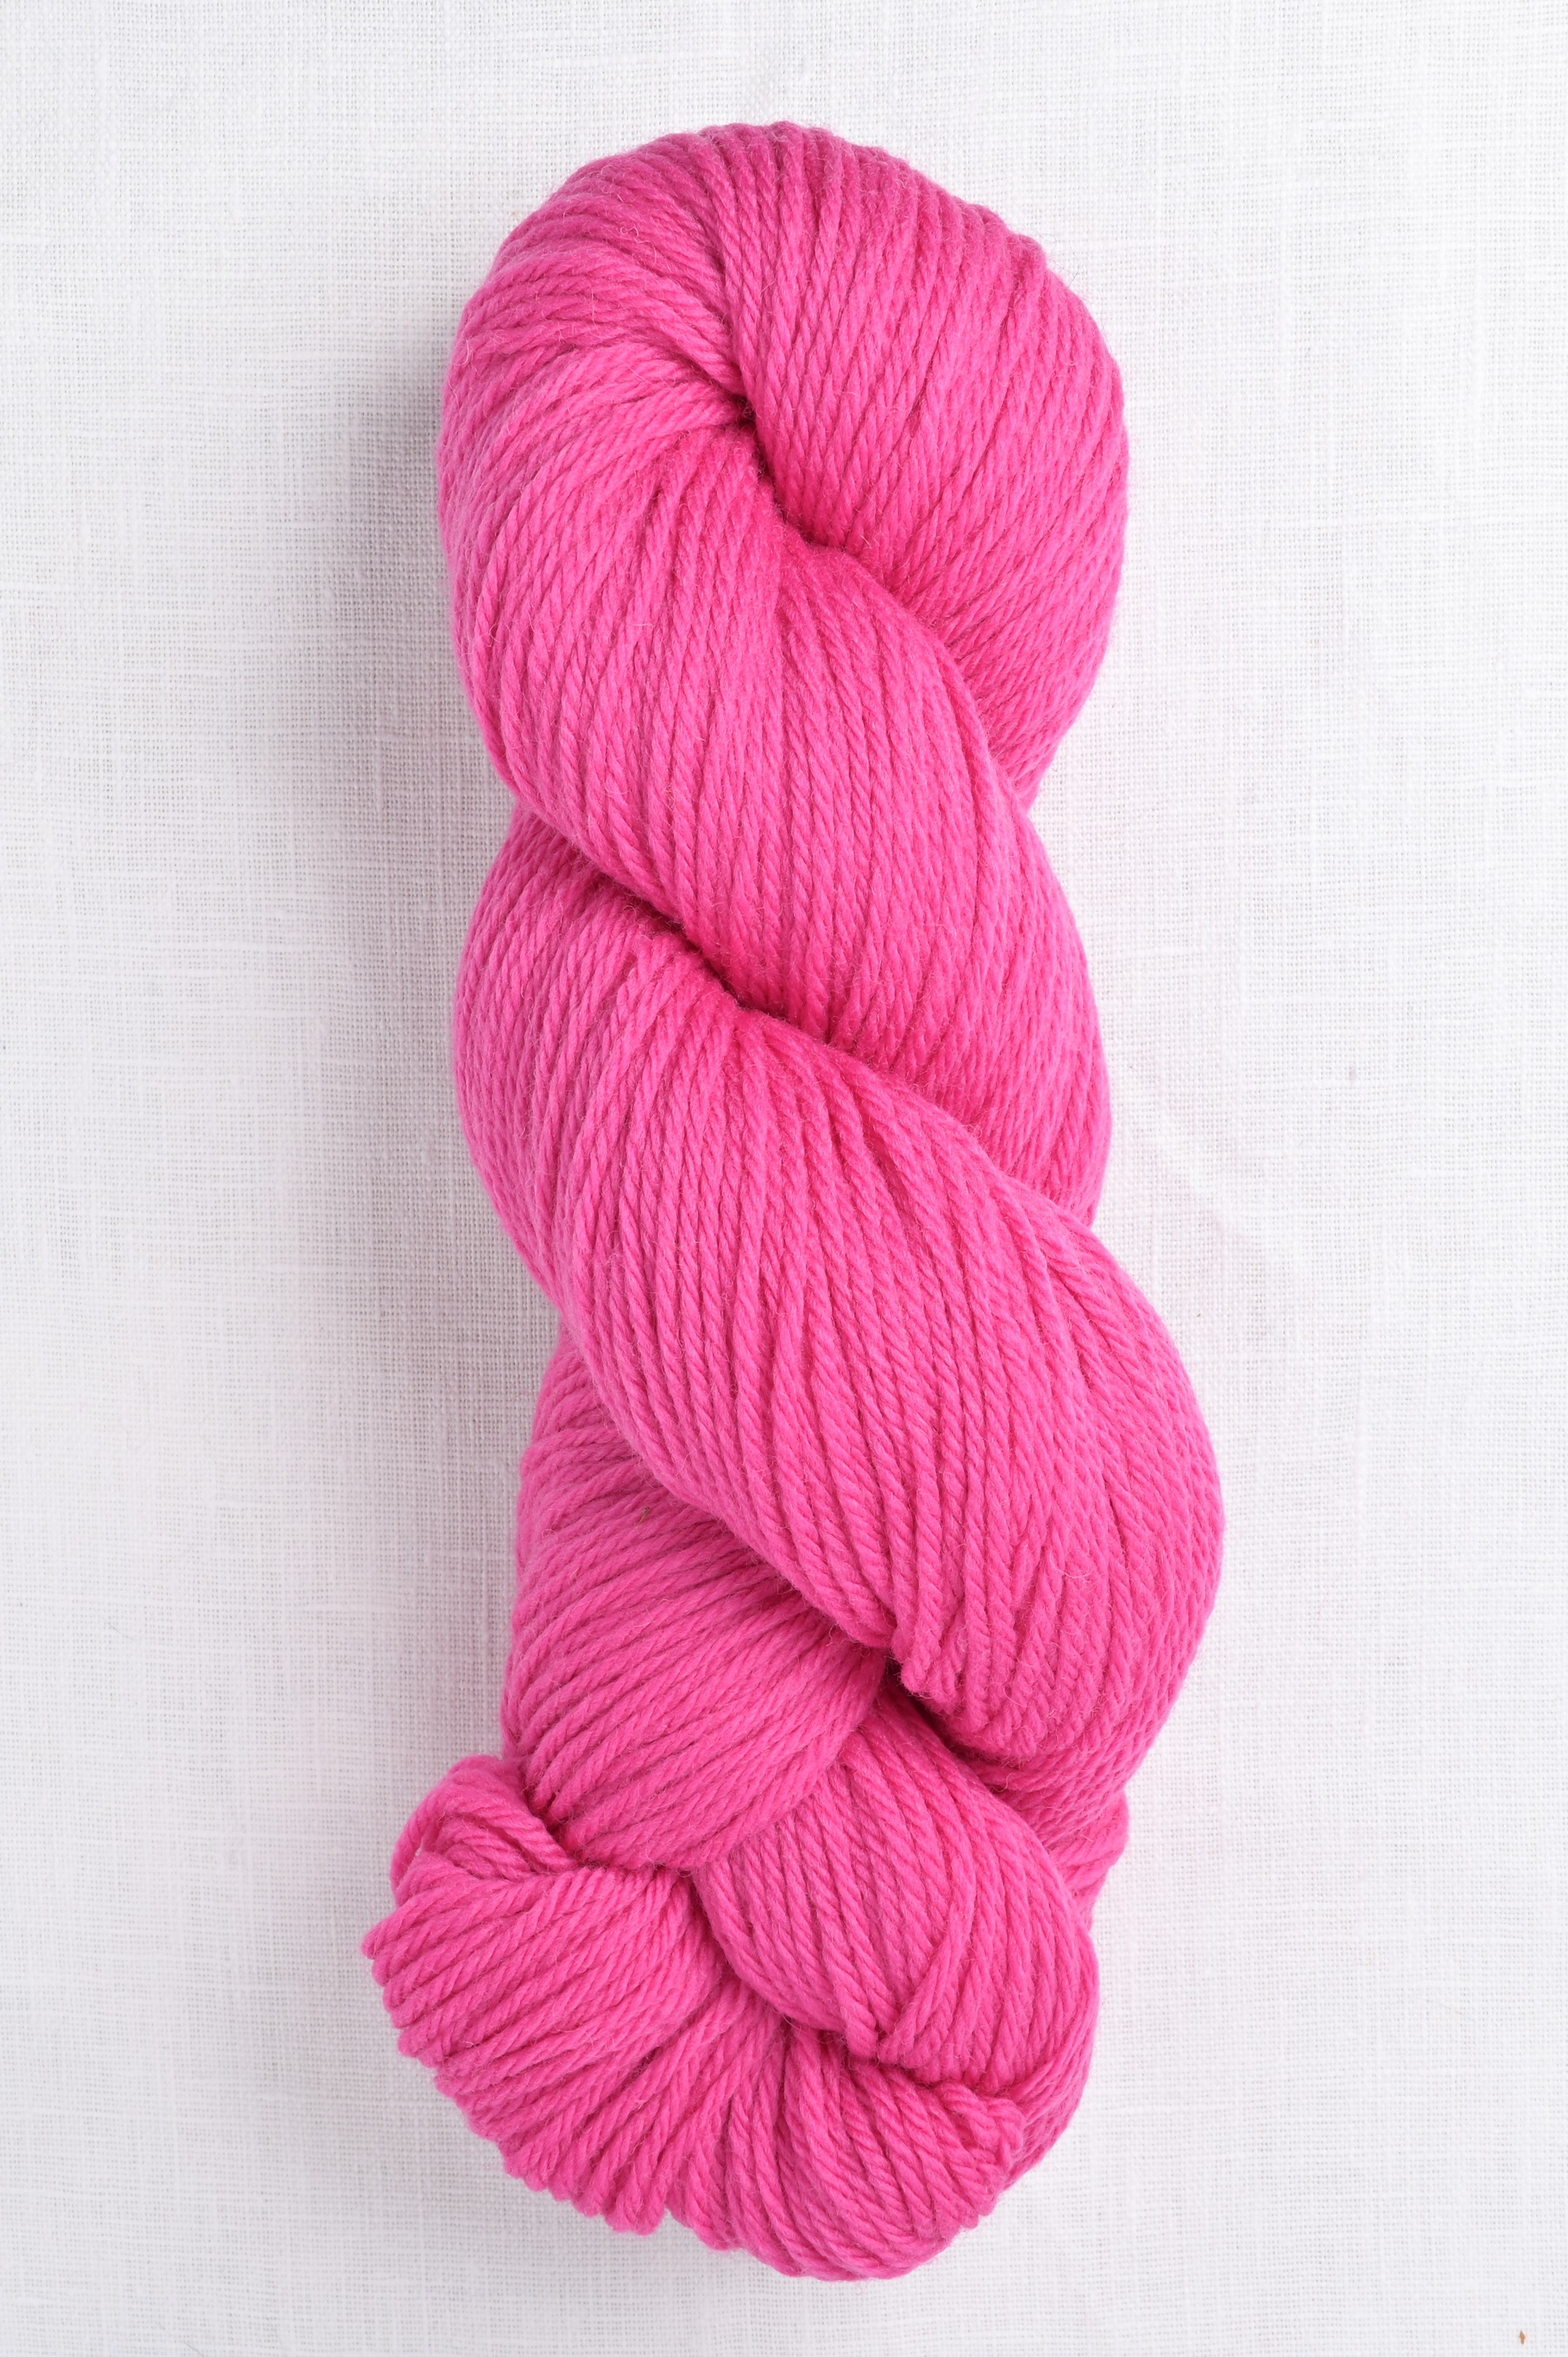 Cascade Nifty Cotton 29 Hot Pink – Wool and Company